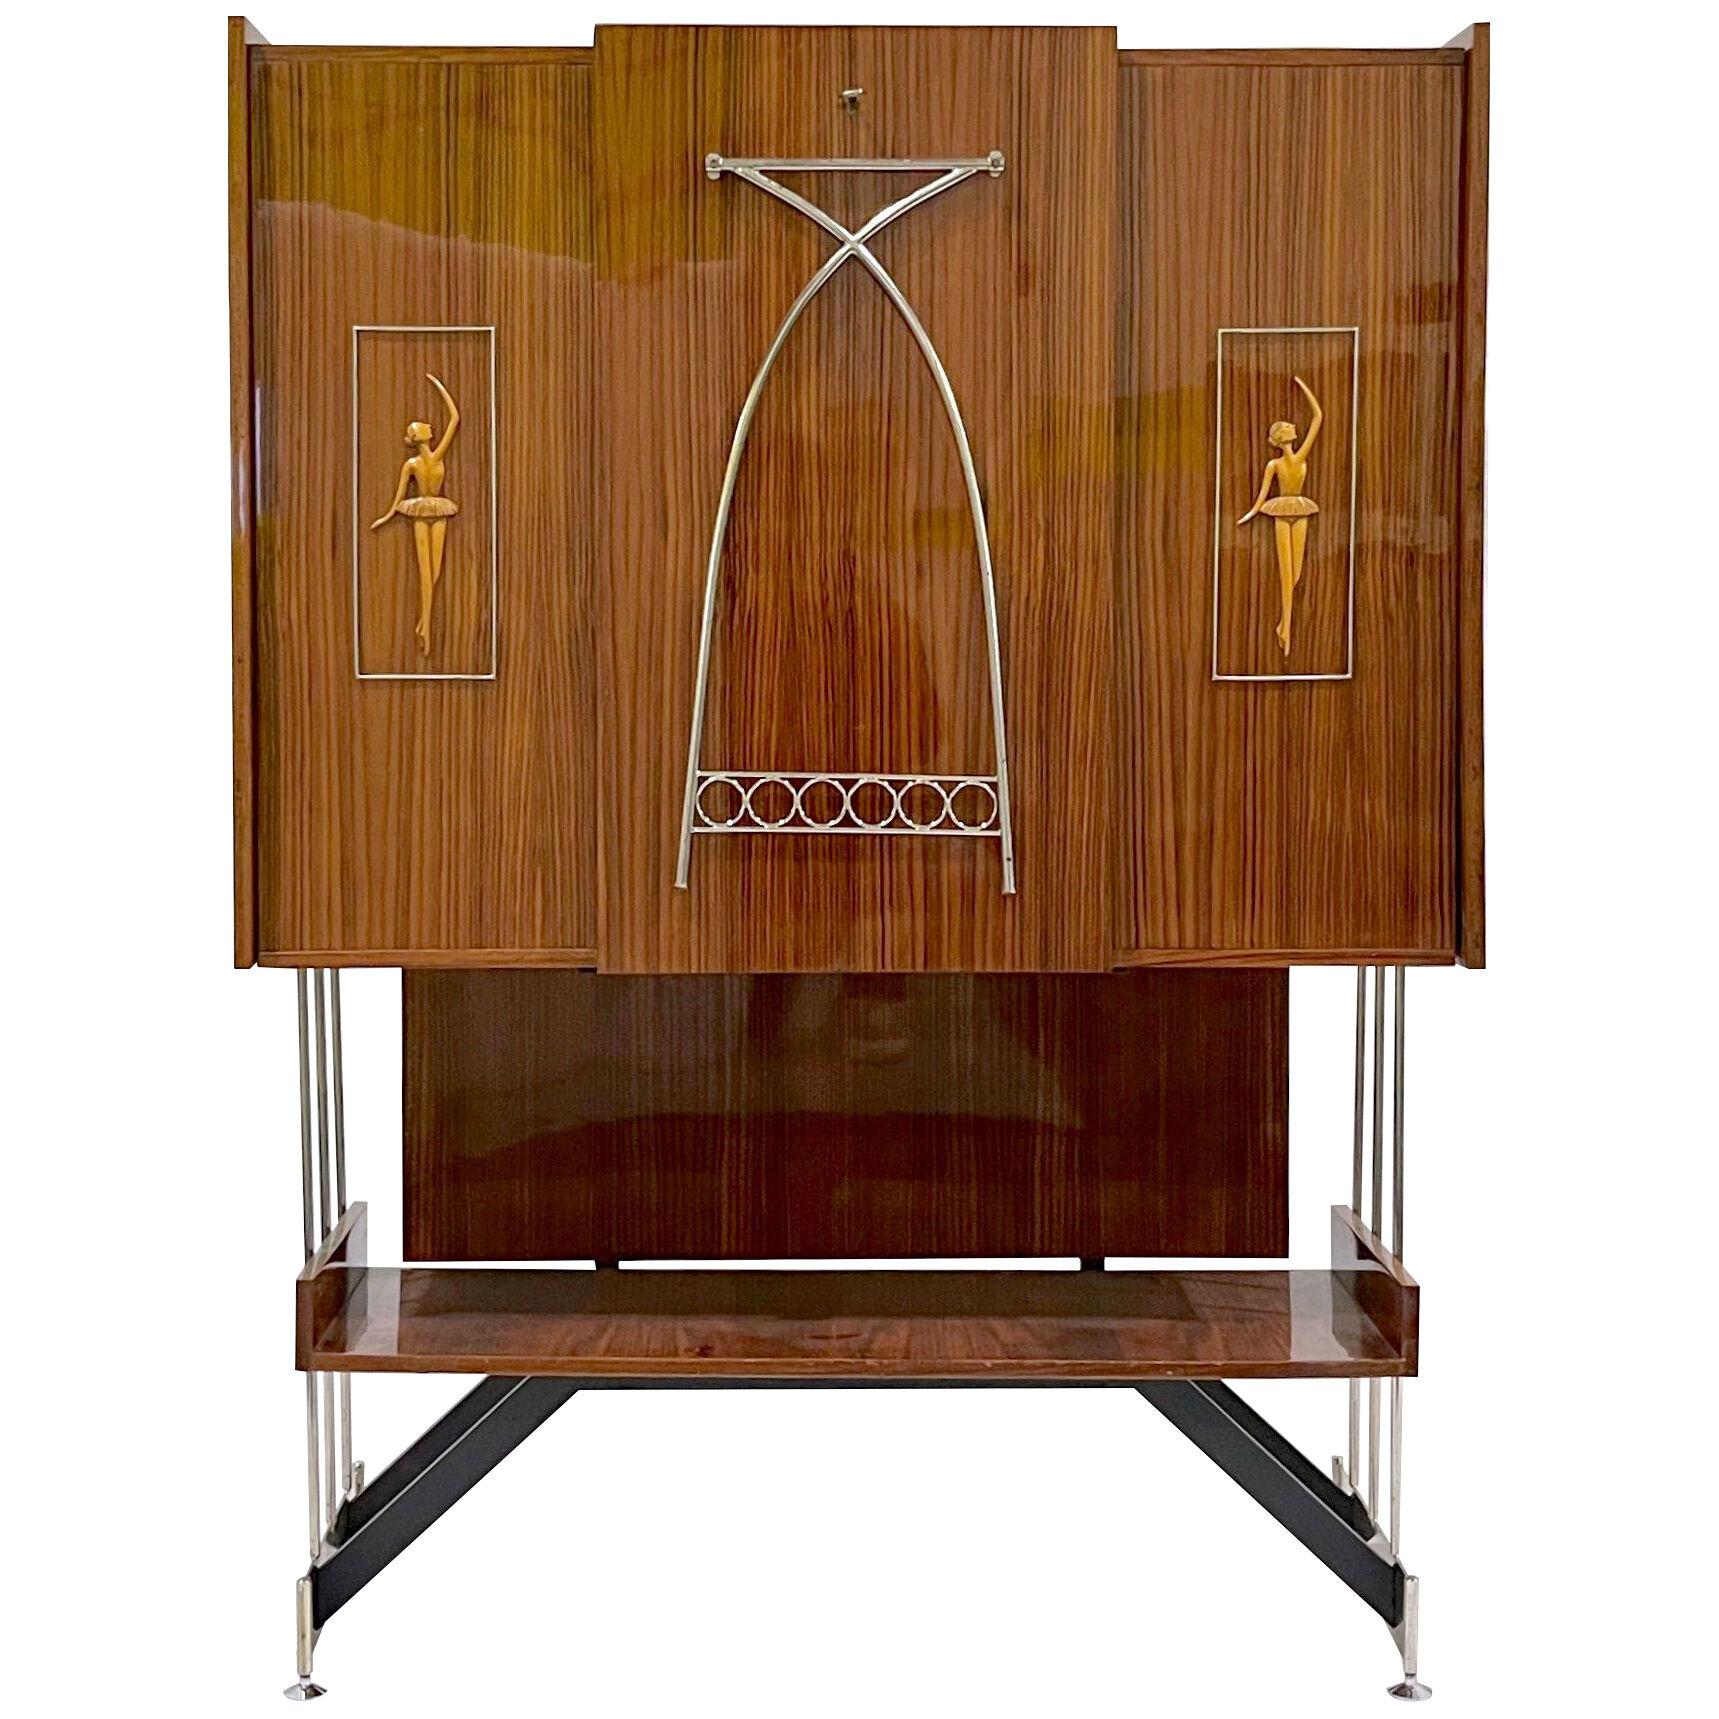 1960s Vittorio Dassi Italian Bar Cabinet with Drop Down Table and Pull Out Sides